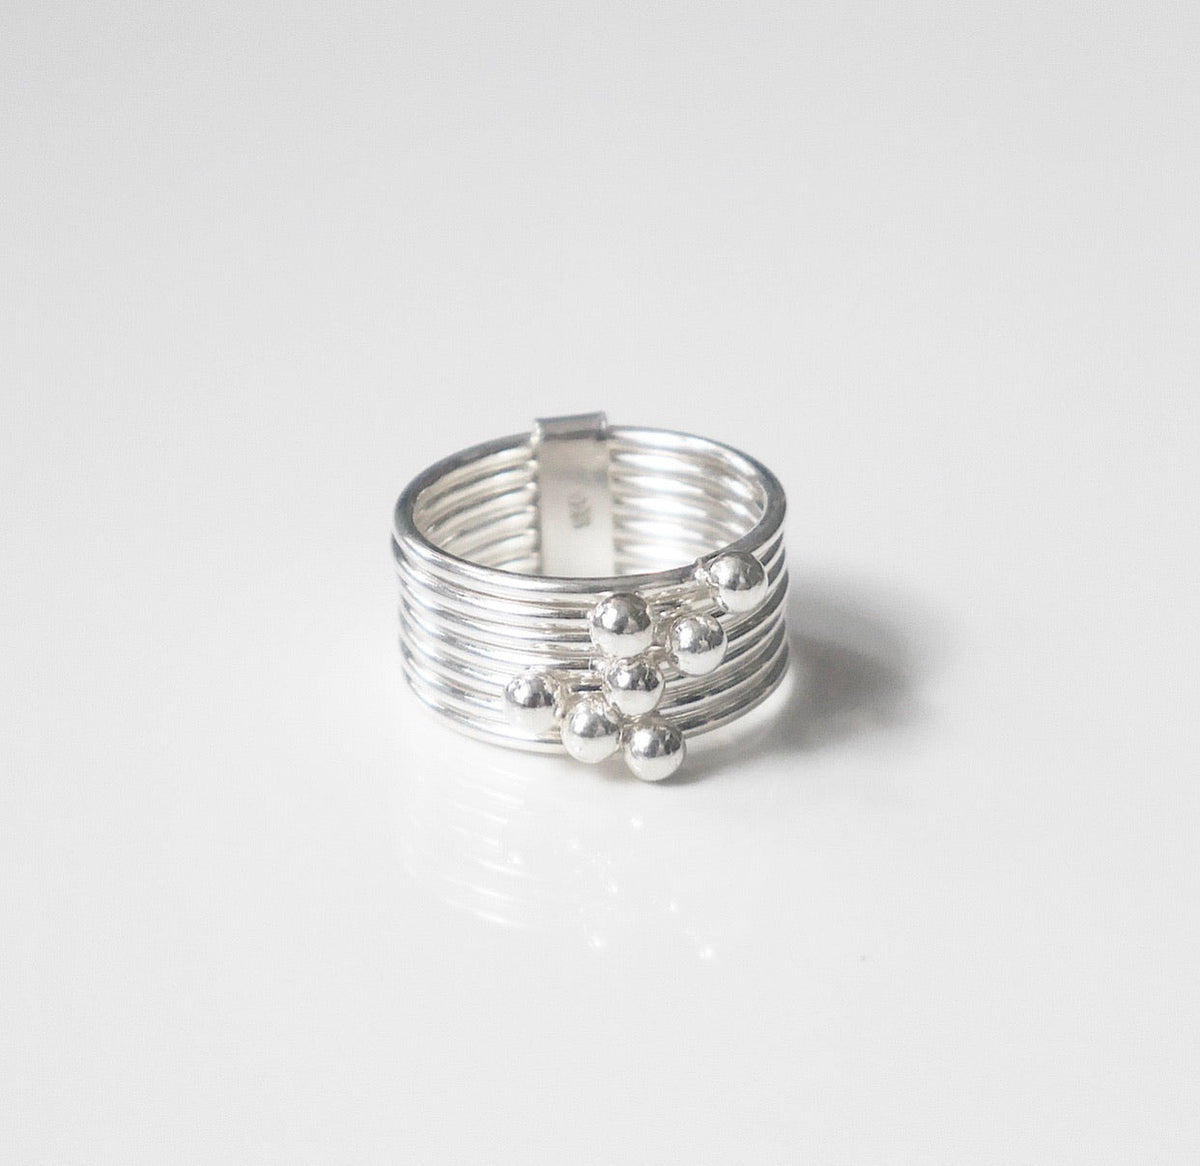 rings, ring, ball rings, jewelry, accessories, womens rings, ball rings, sterling silver rings, rings that wont turn green with water, stacked rings, ring with balls, .925 sterling silver rings, popular jewelry, trending on instagram and tiktok, fashion jewelry, fine jewelry, cool jewelry, gift ideas, white gold rings, white gold jewelry, Kesley Boutique , movable rings, casual jewelry, statement rings, anti tarnish jewelry